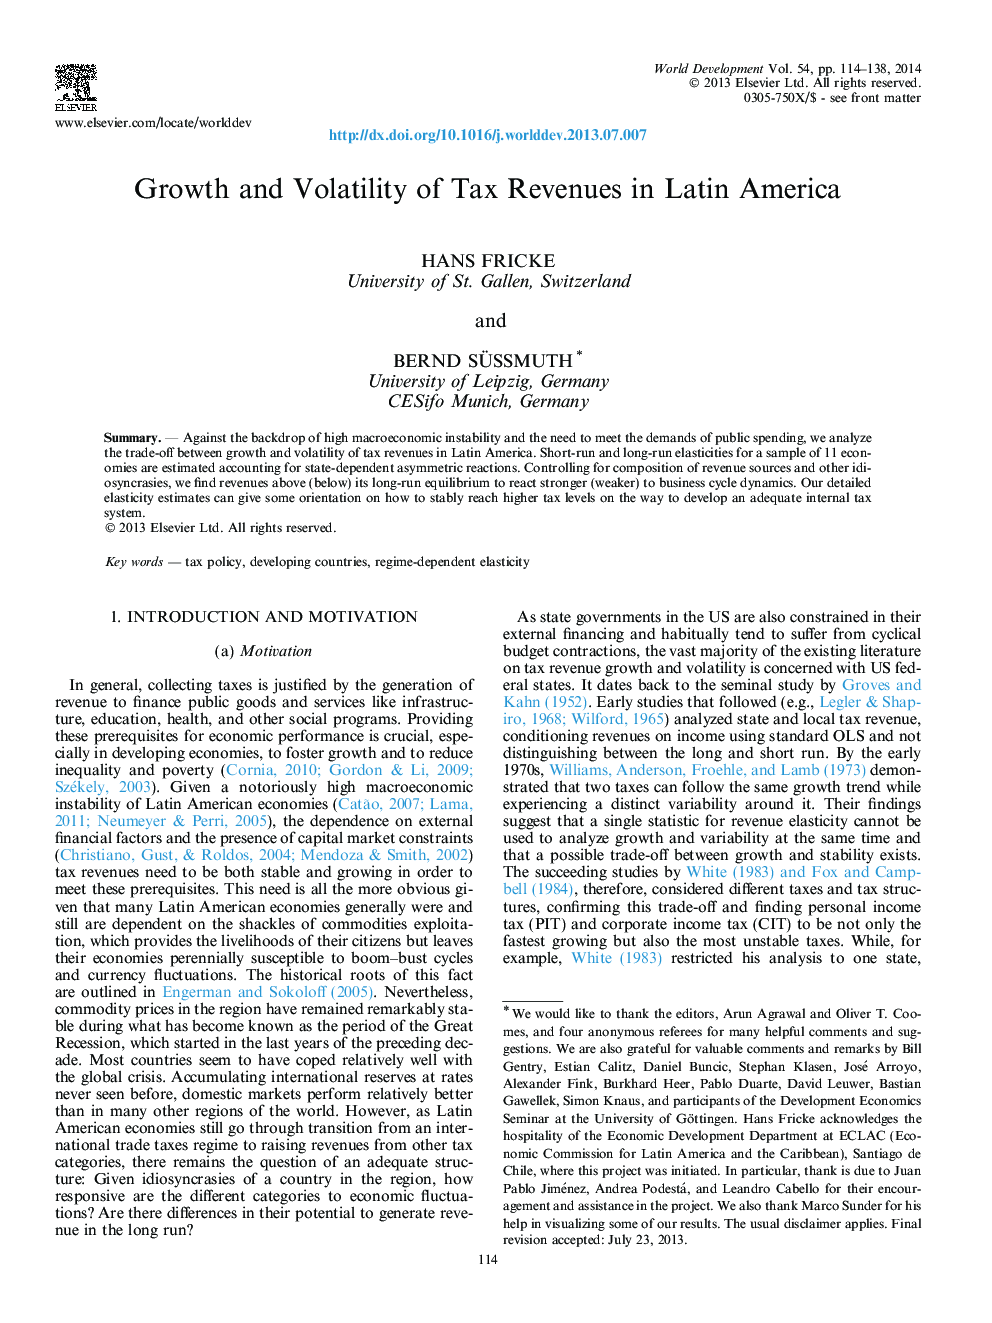 Growth and Volatility of Tax Revenues in Latin America